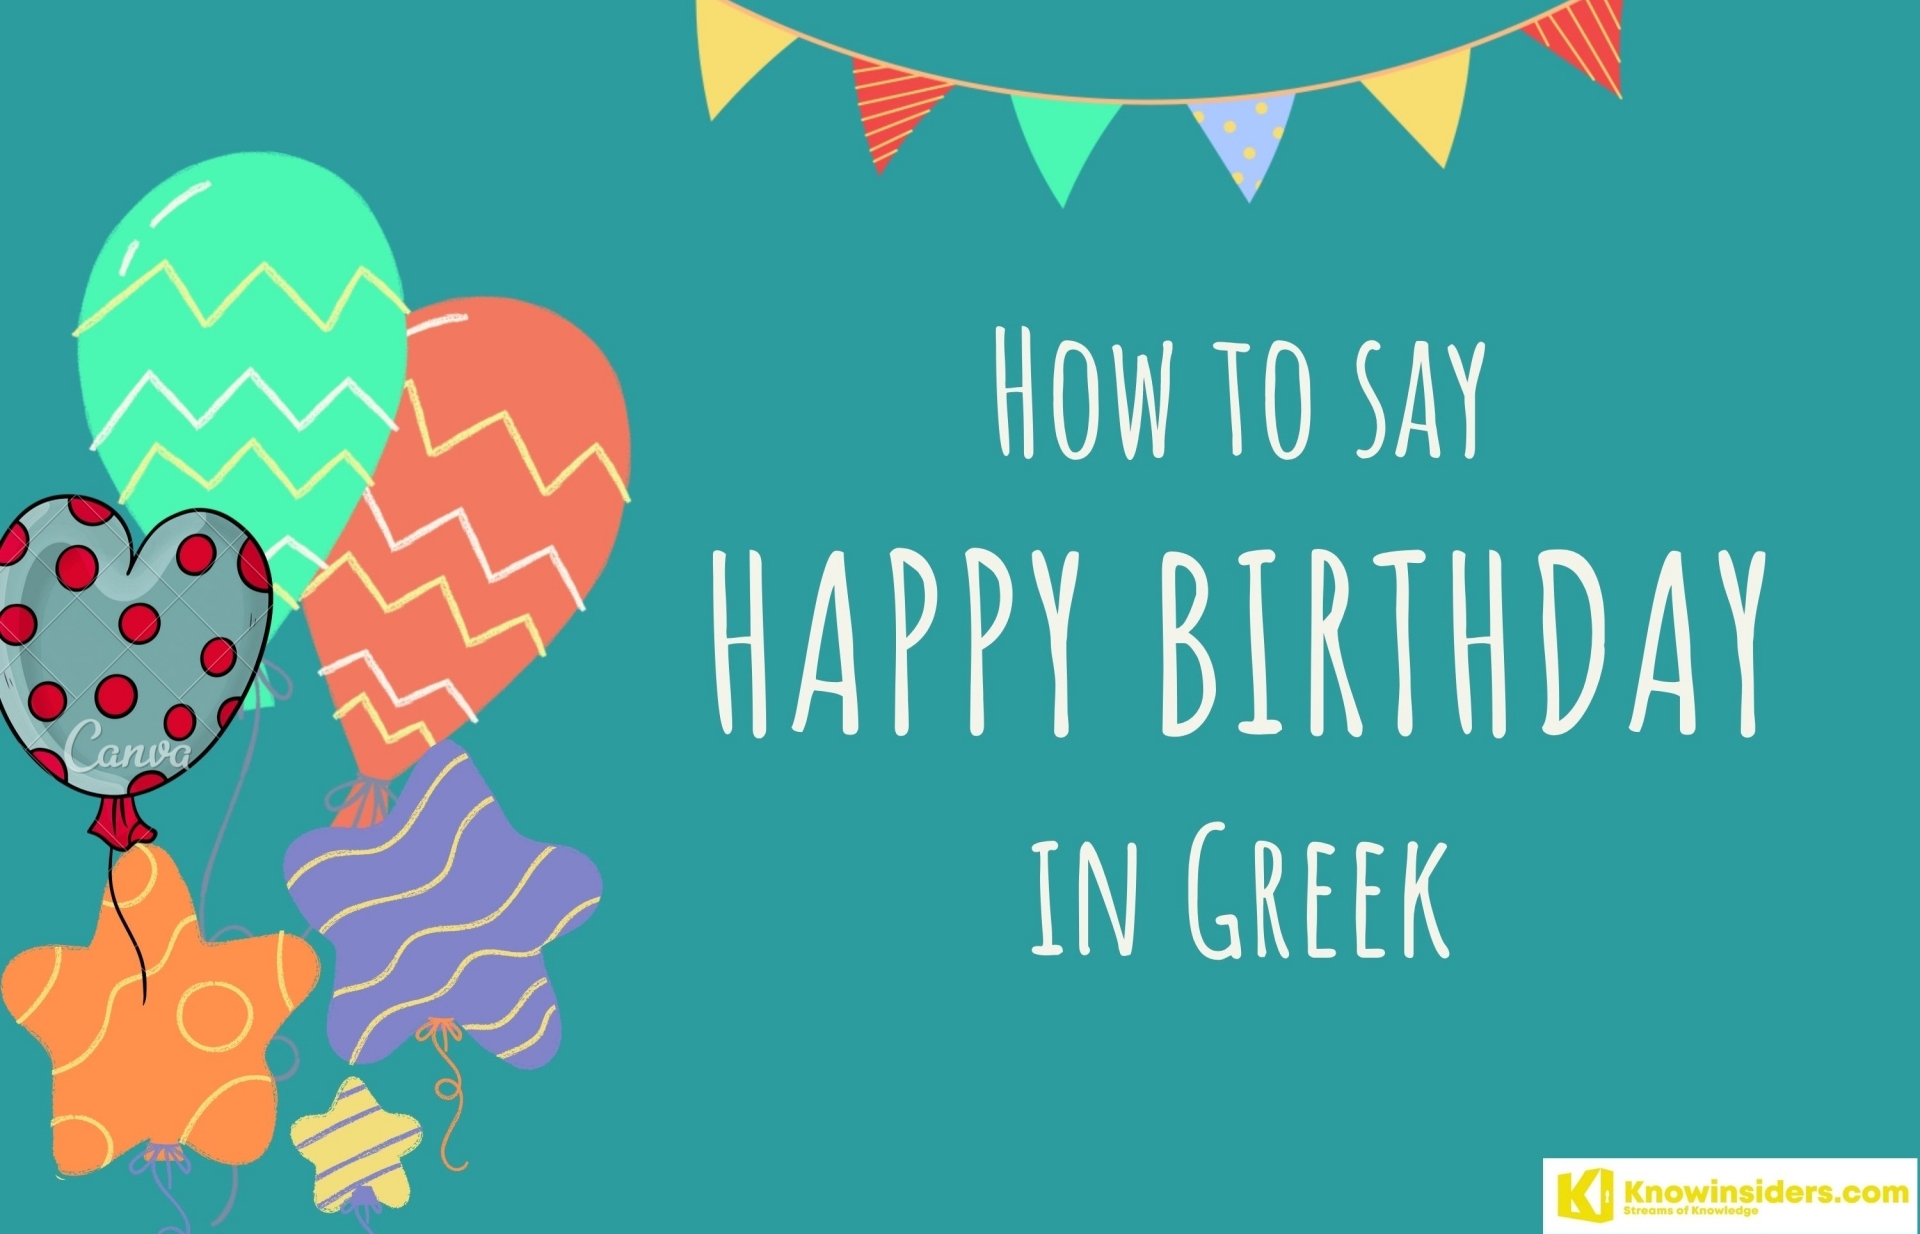 How to Say Happy Birthday in Greek - Best Wishes, Quotes and Popular Song in Greek Version